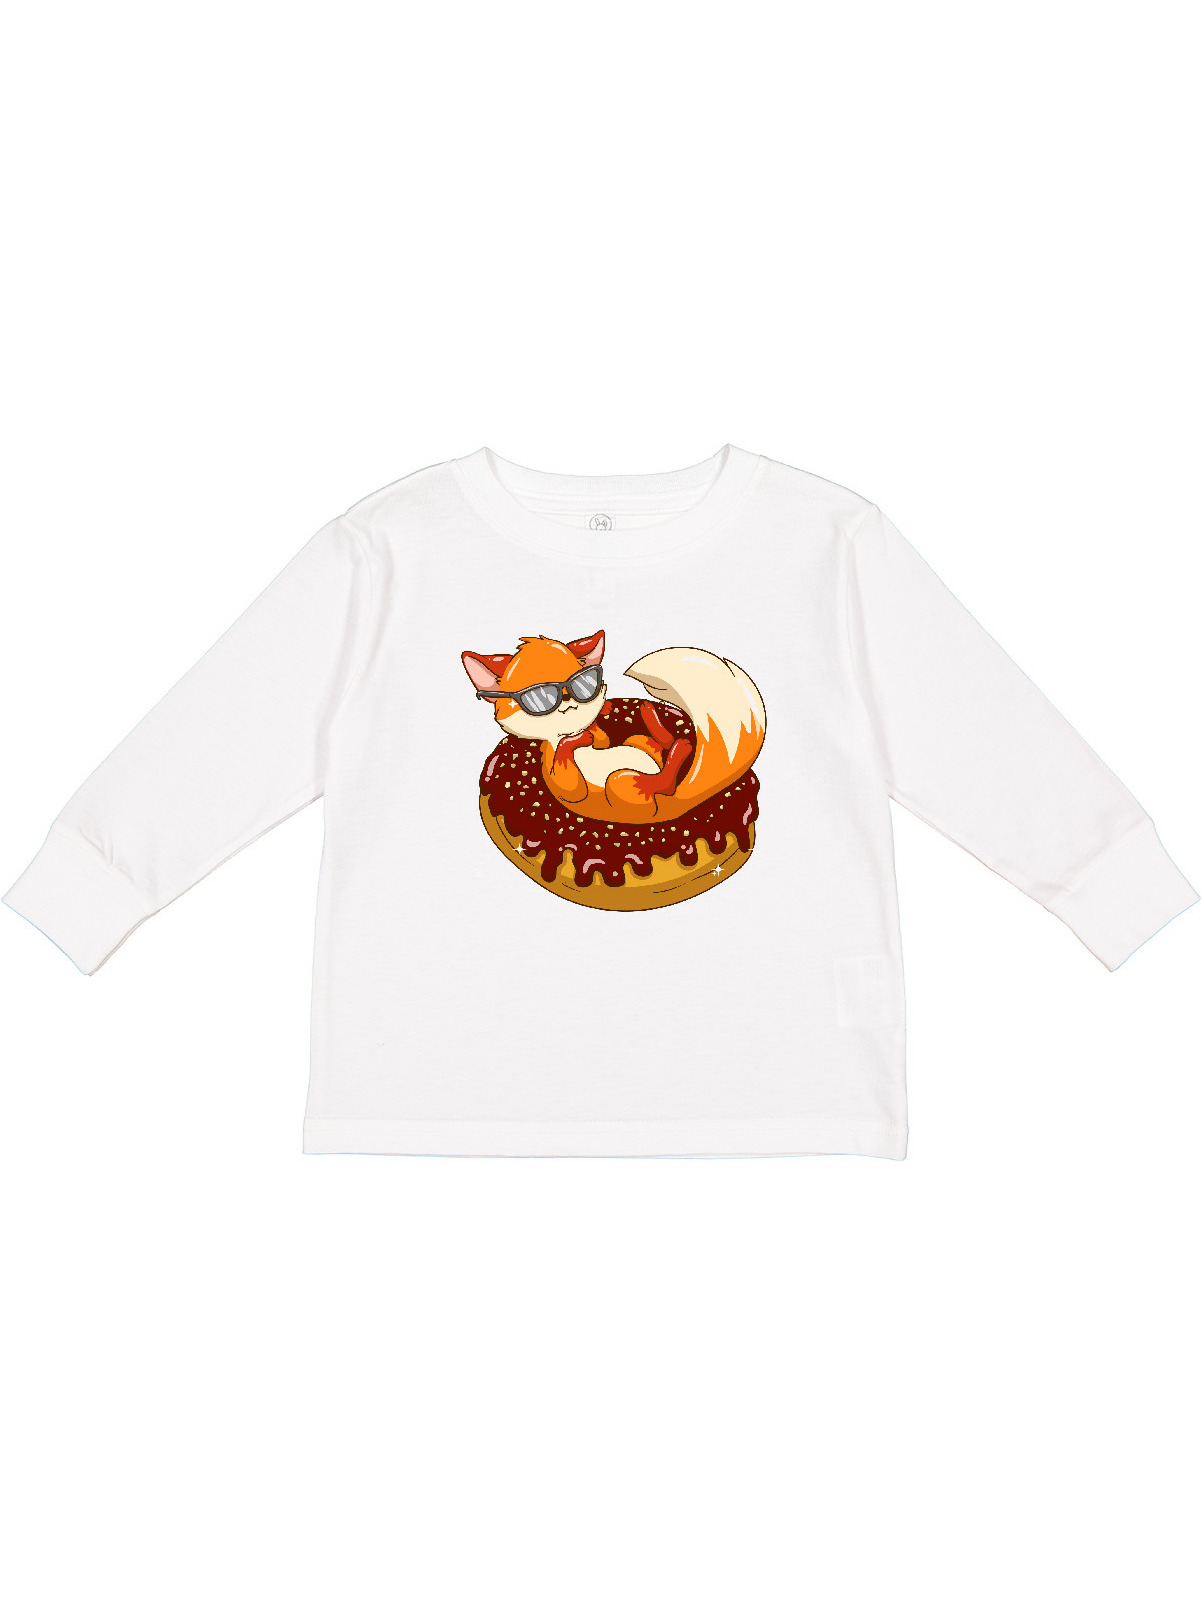 Inktastic Fox Funny Donut Lover Boys or Girls Long Sleeve Toddler T-Shirt - image 1 of 4